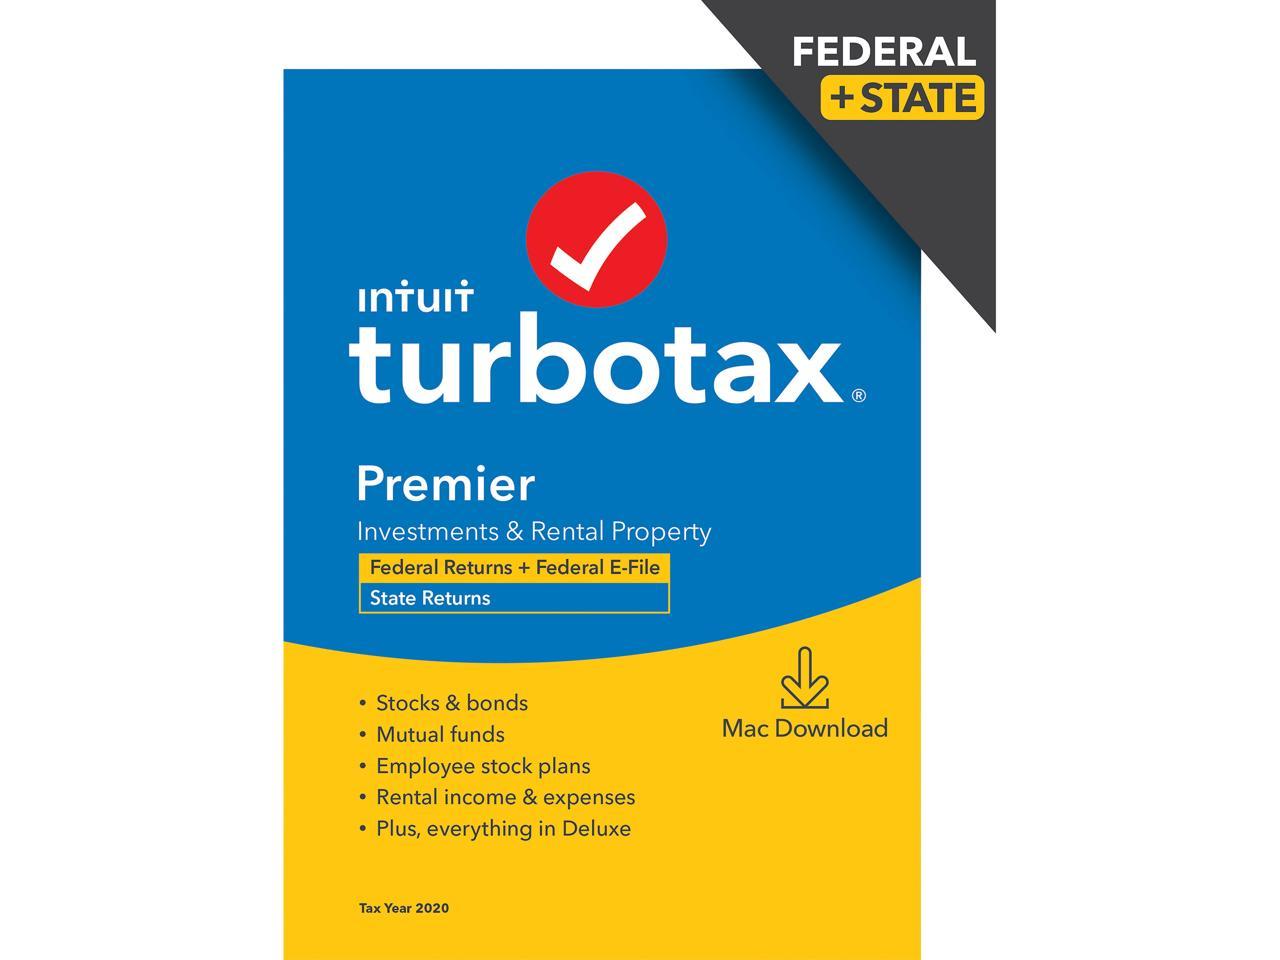 turbo tax delux 2014 downloads for mac